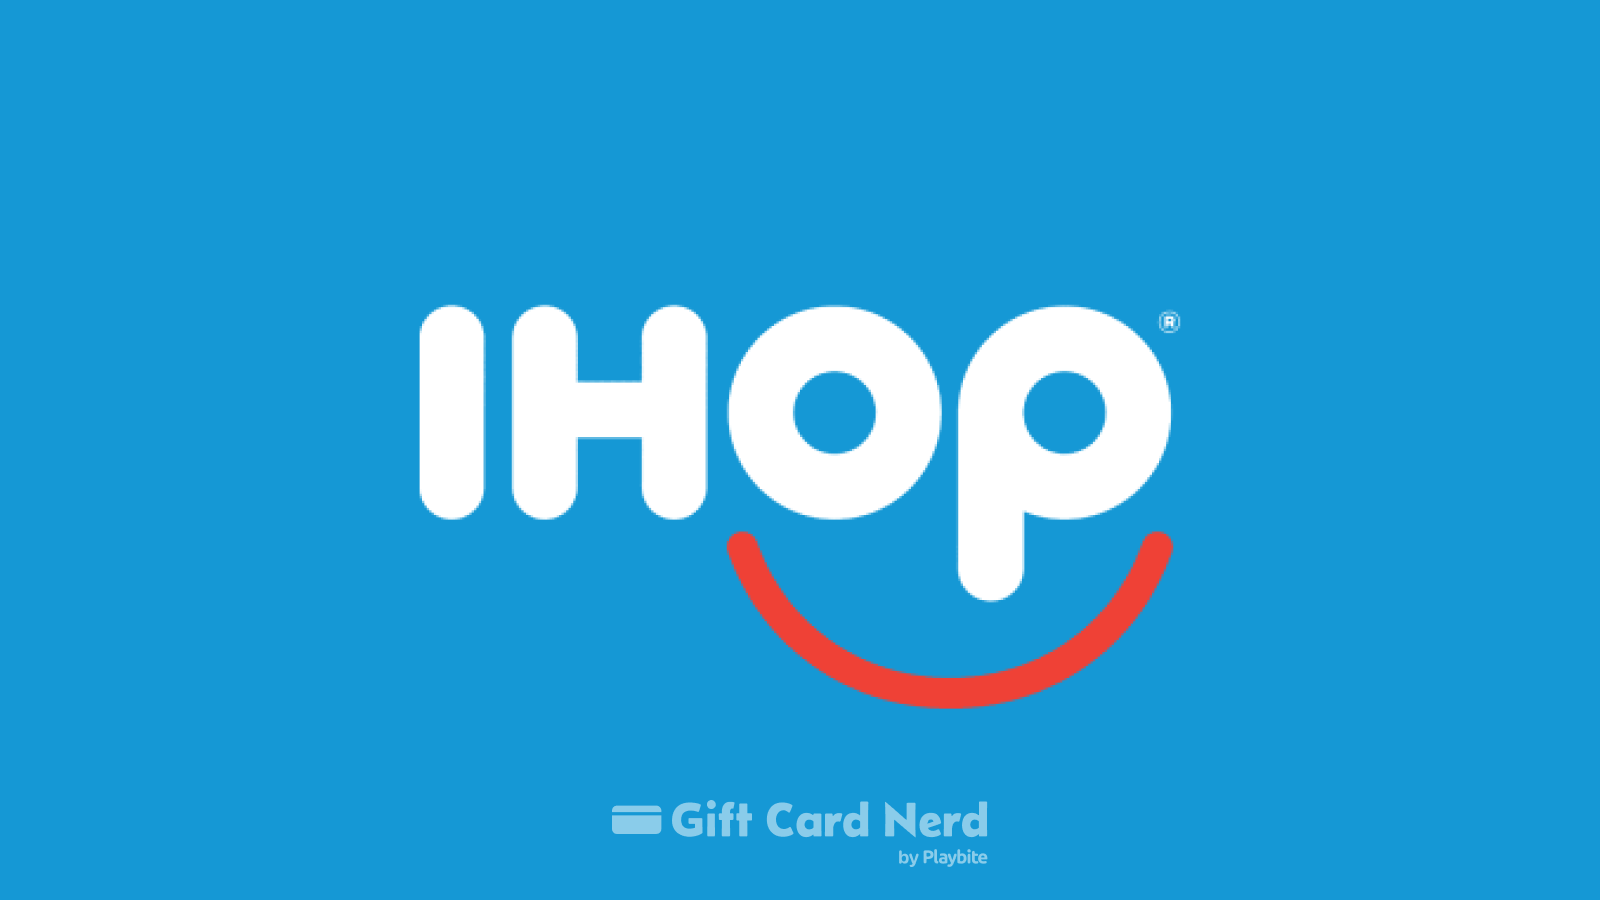 Can I use an IHOP gift card on Apple Wallet?